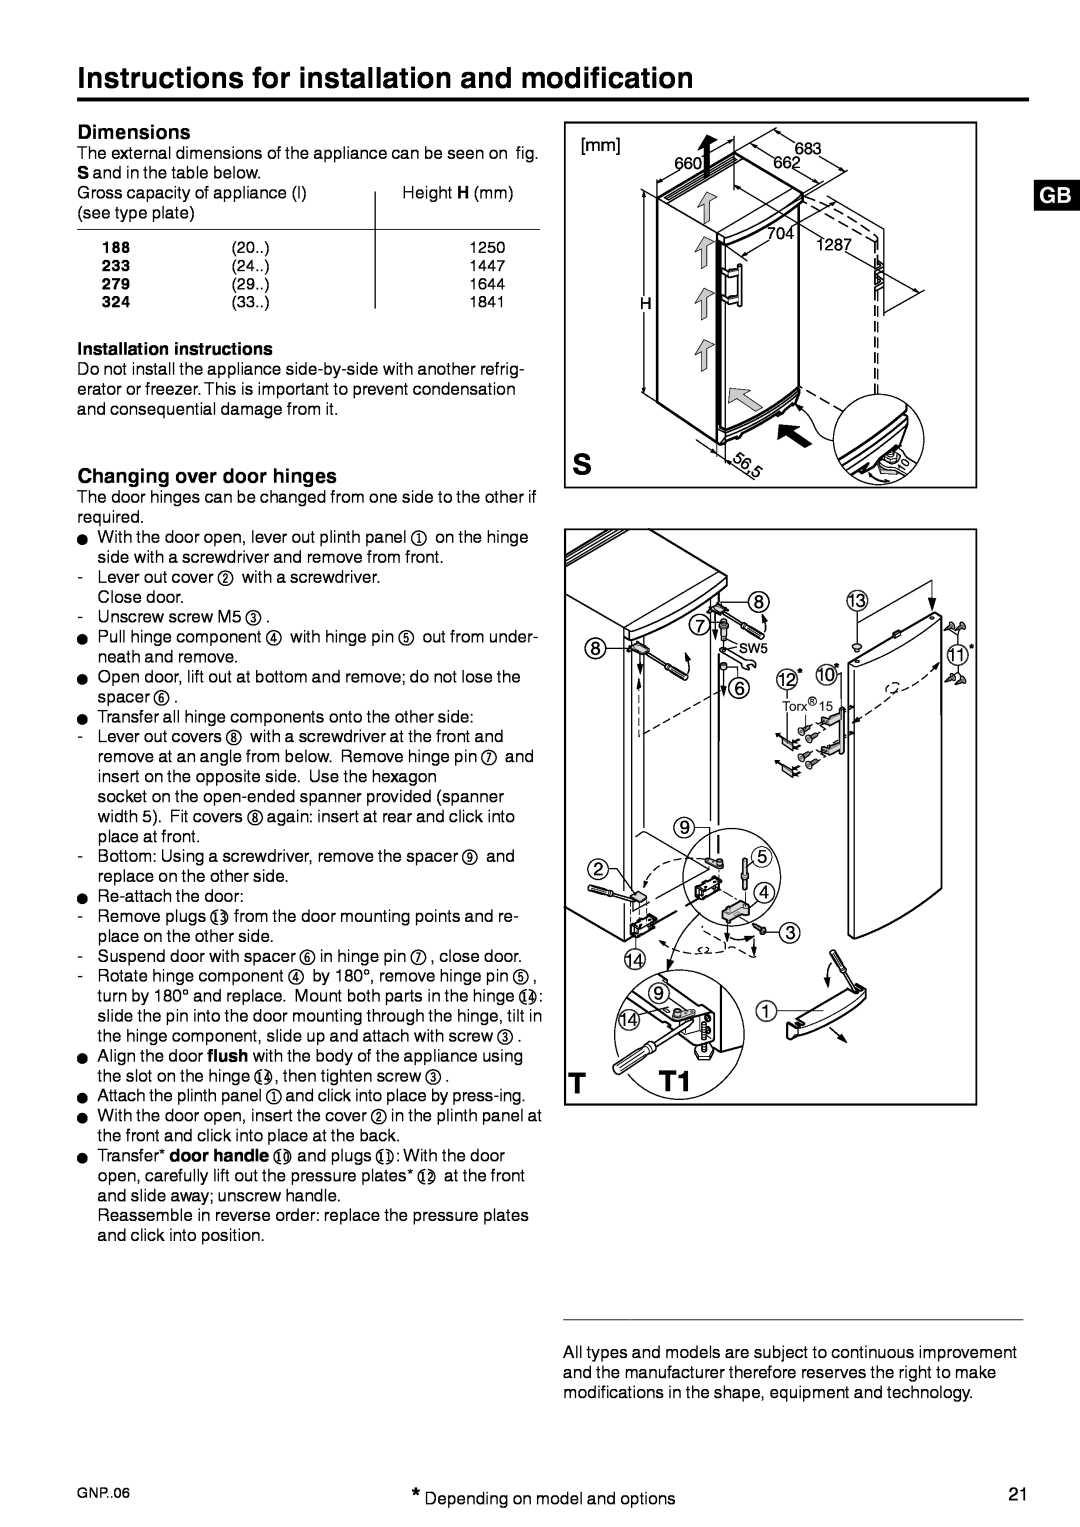 Liebherr 7084 152 - 00 manual Instructions for installation and modification, Dimensions, Changing over door hinges, 56,5 